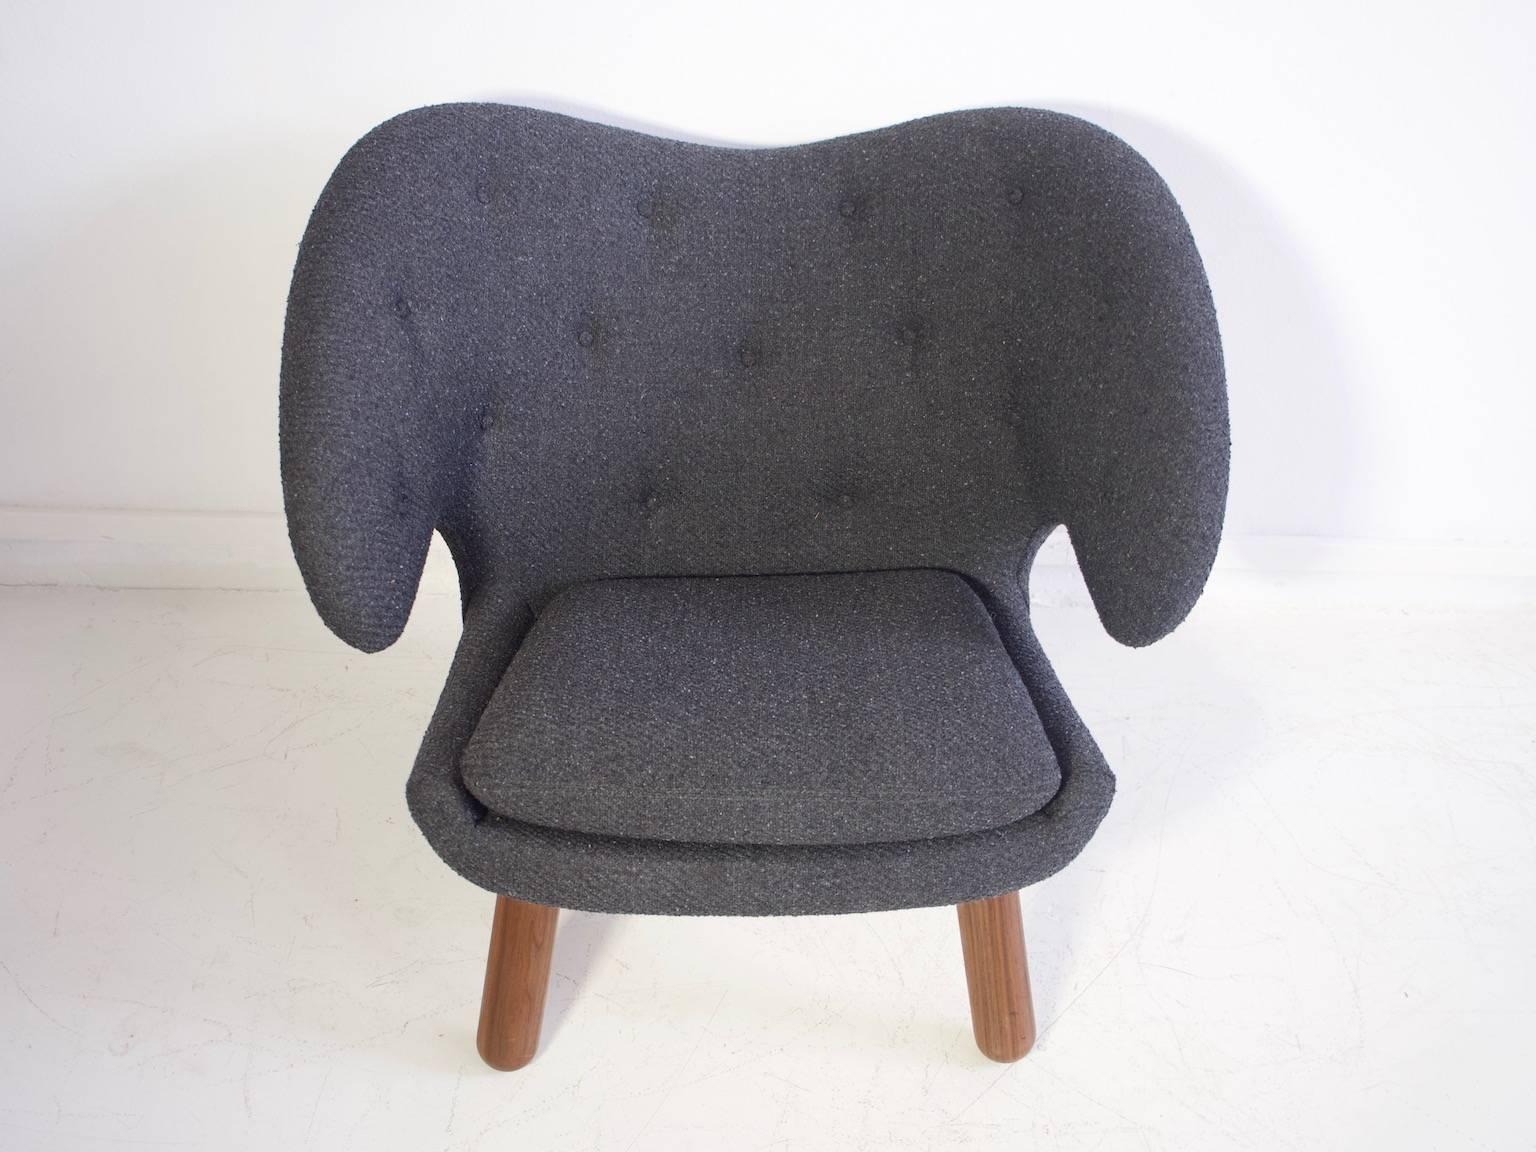 Finn Juhl Pelikan Lounge Chair with Round Walnut Legs and Grey Upholstery 1